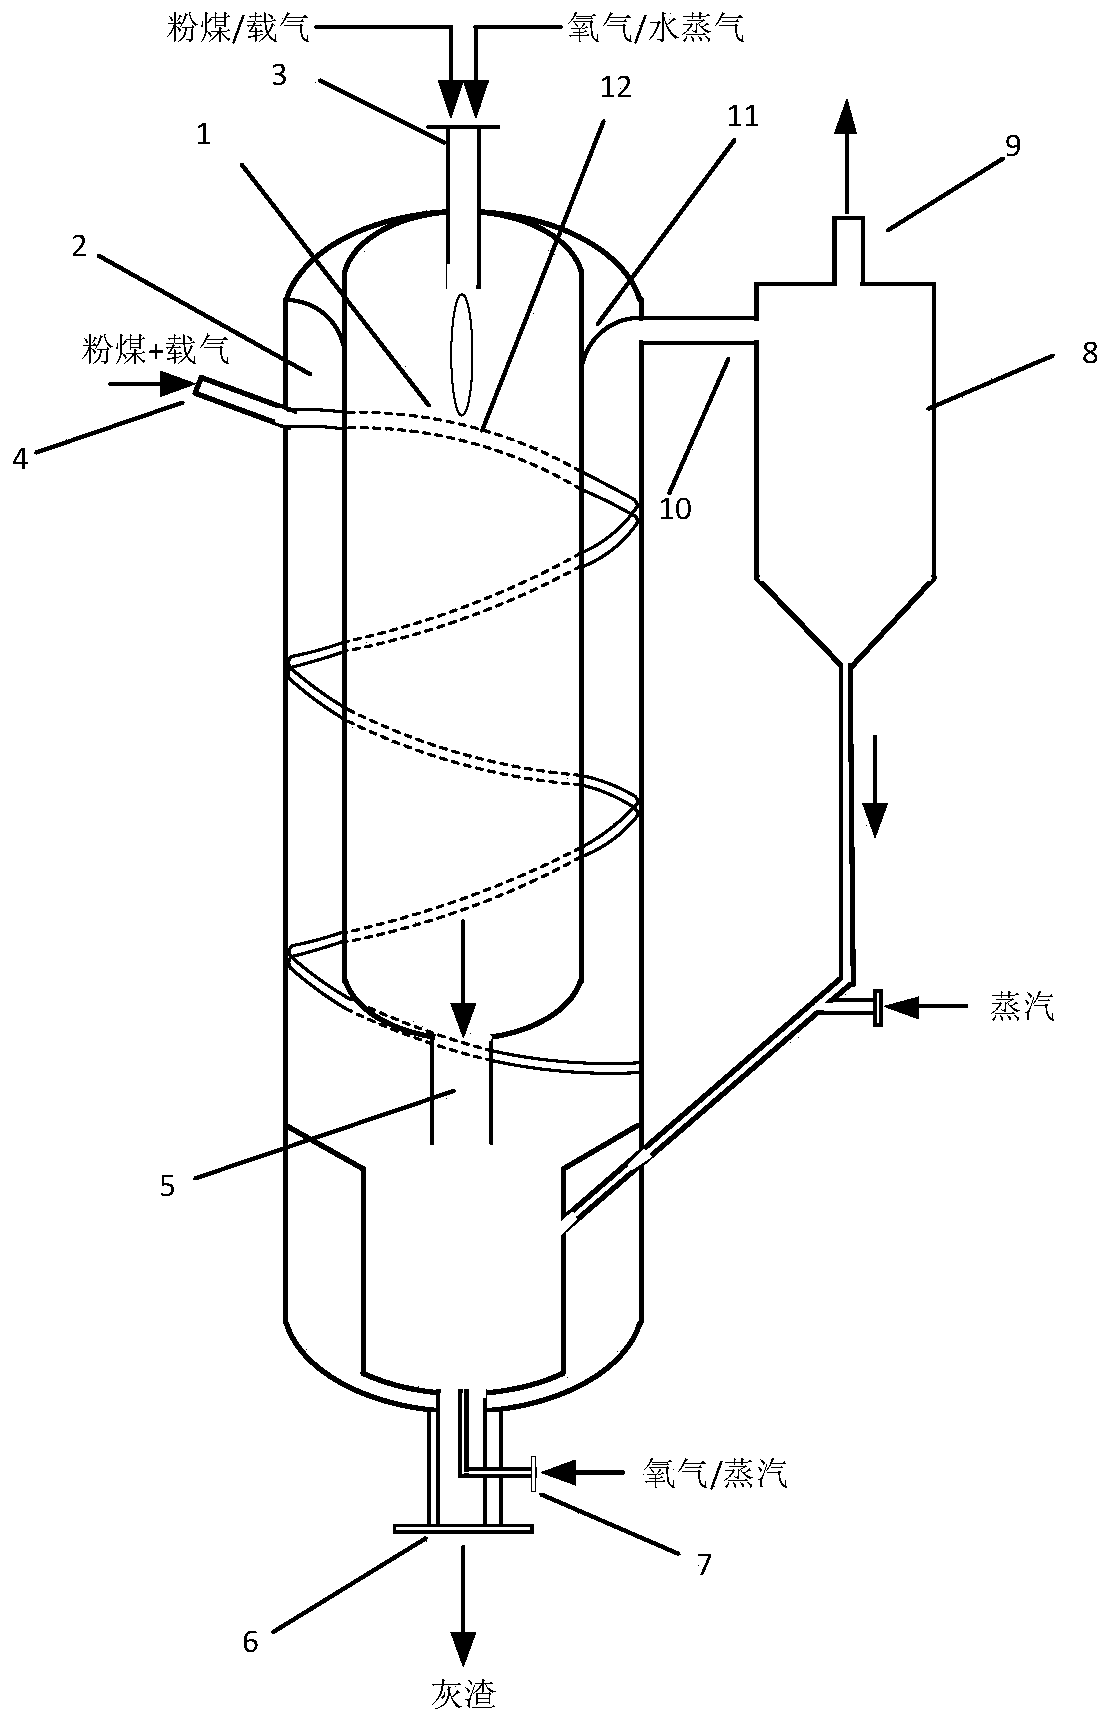 Pyrolysis-gasification integrated treatment device and method